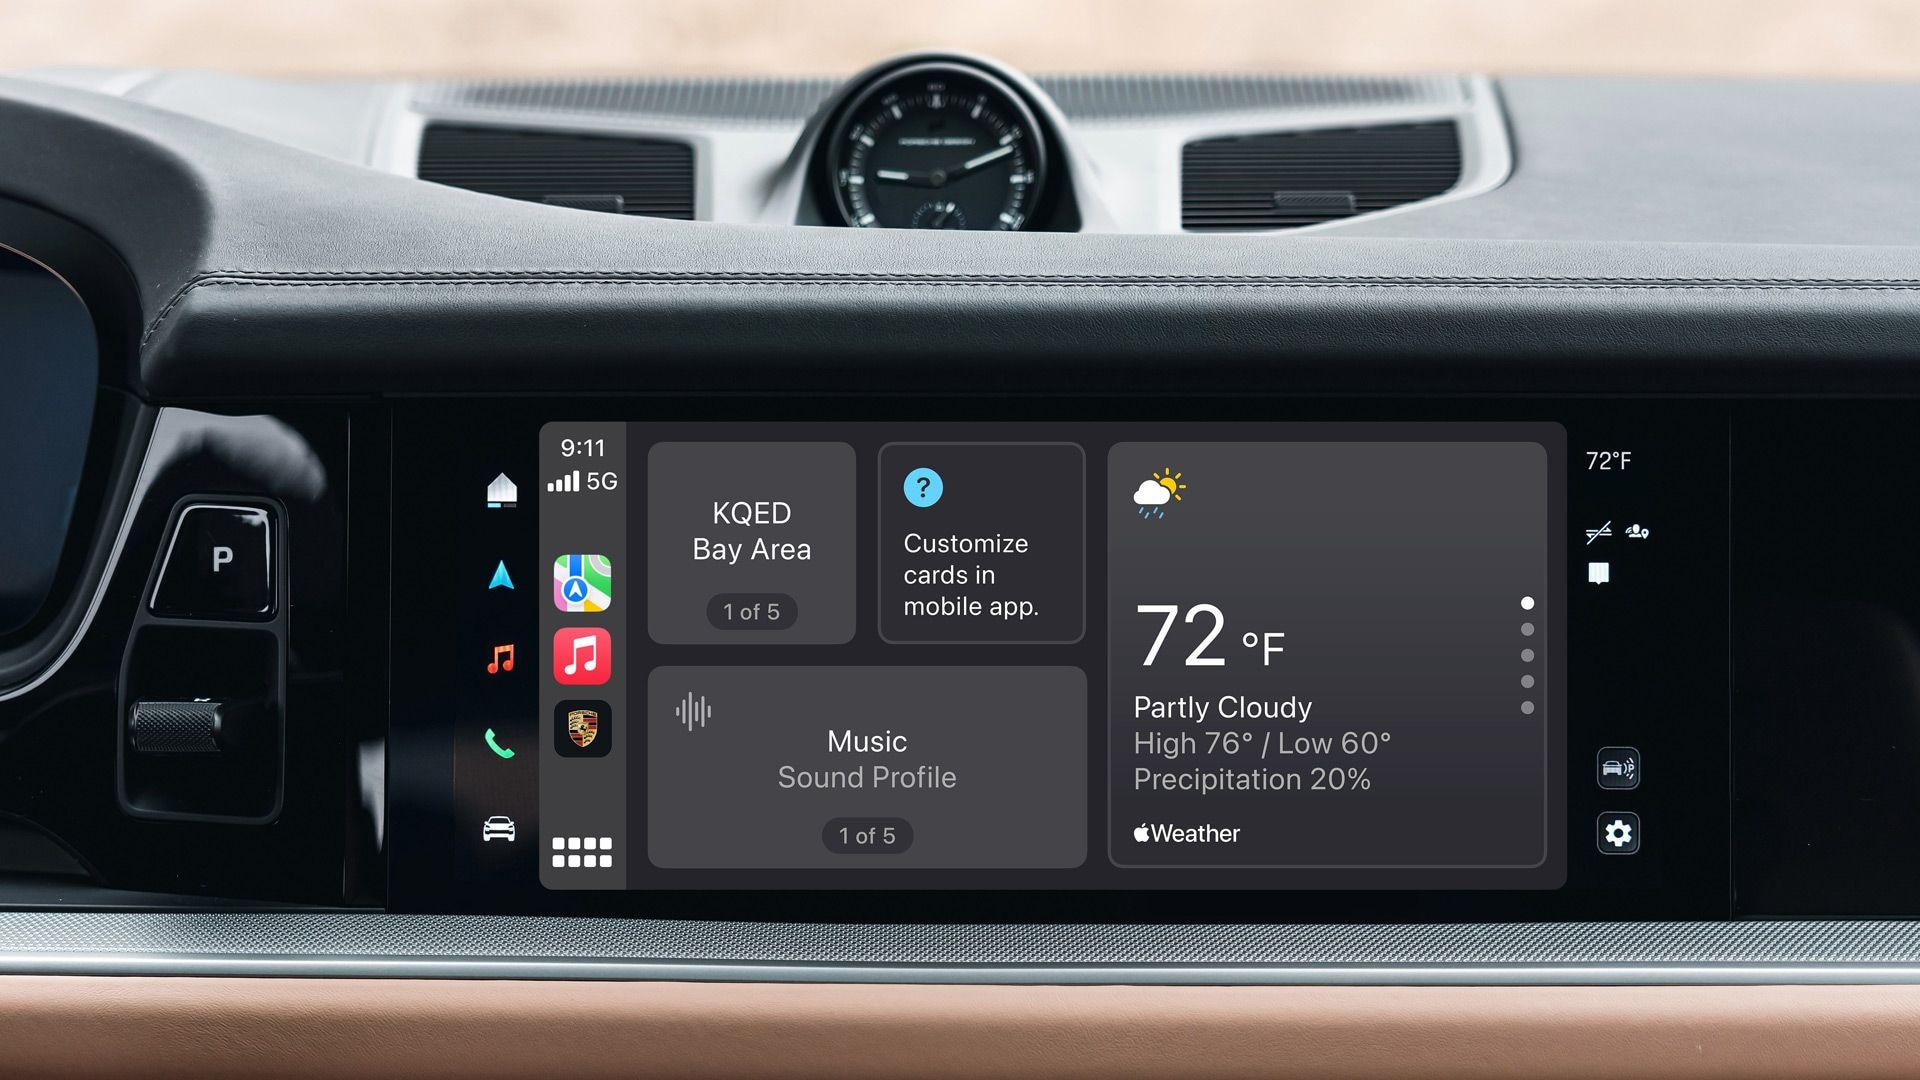 My Porsche App provides new features within Apple CarPlay